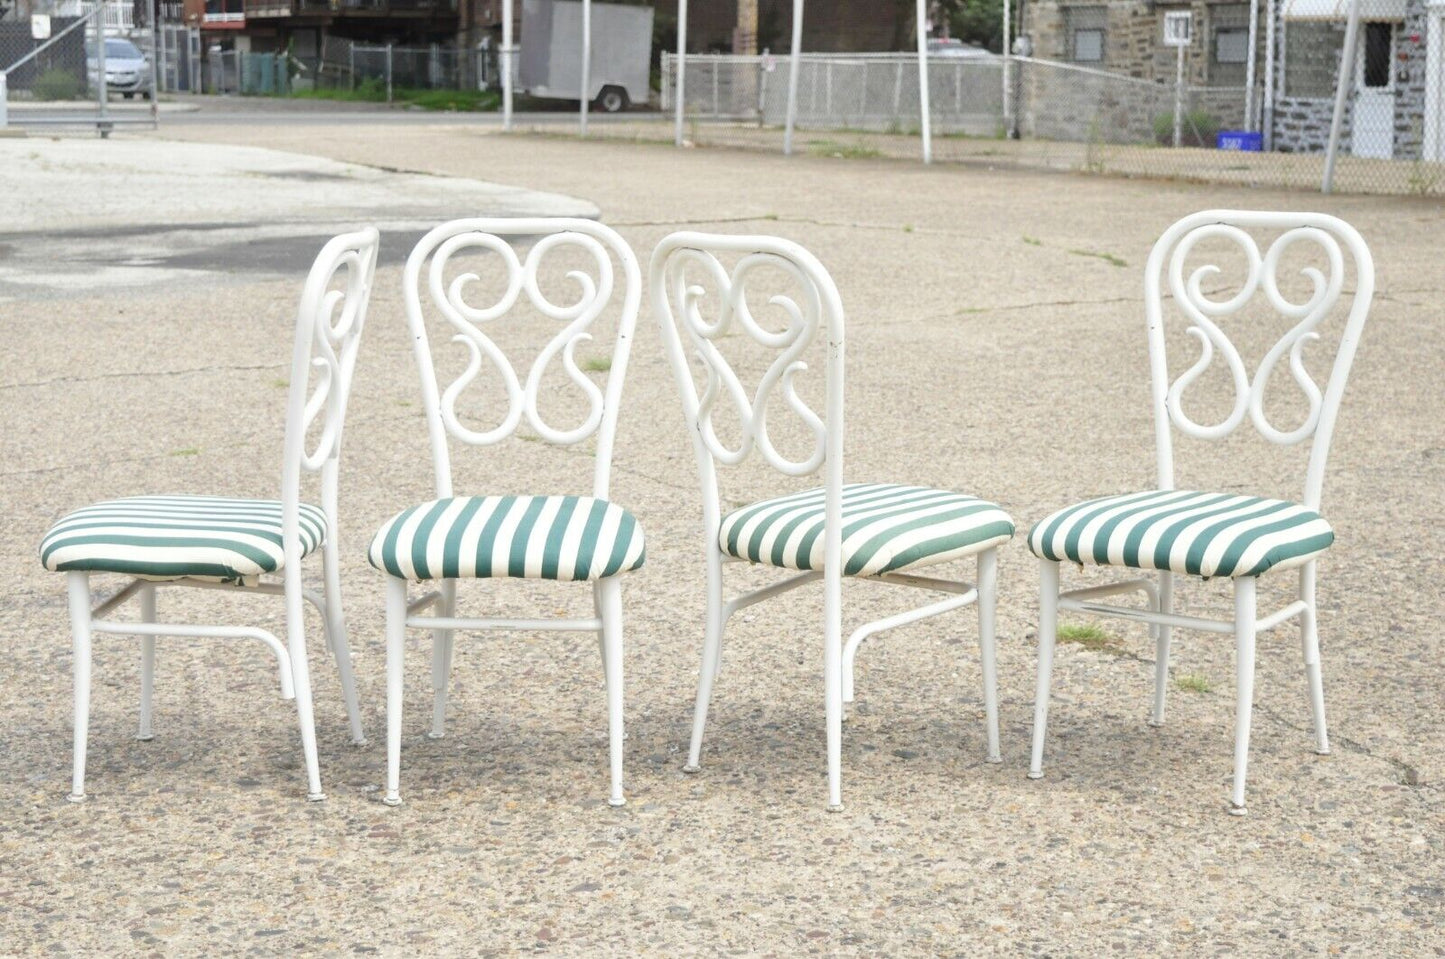 Vintage Metal Thonet Bentwood Austrian Style Bistro Dining Chairs - Set of 4